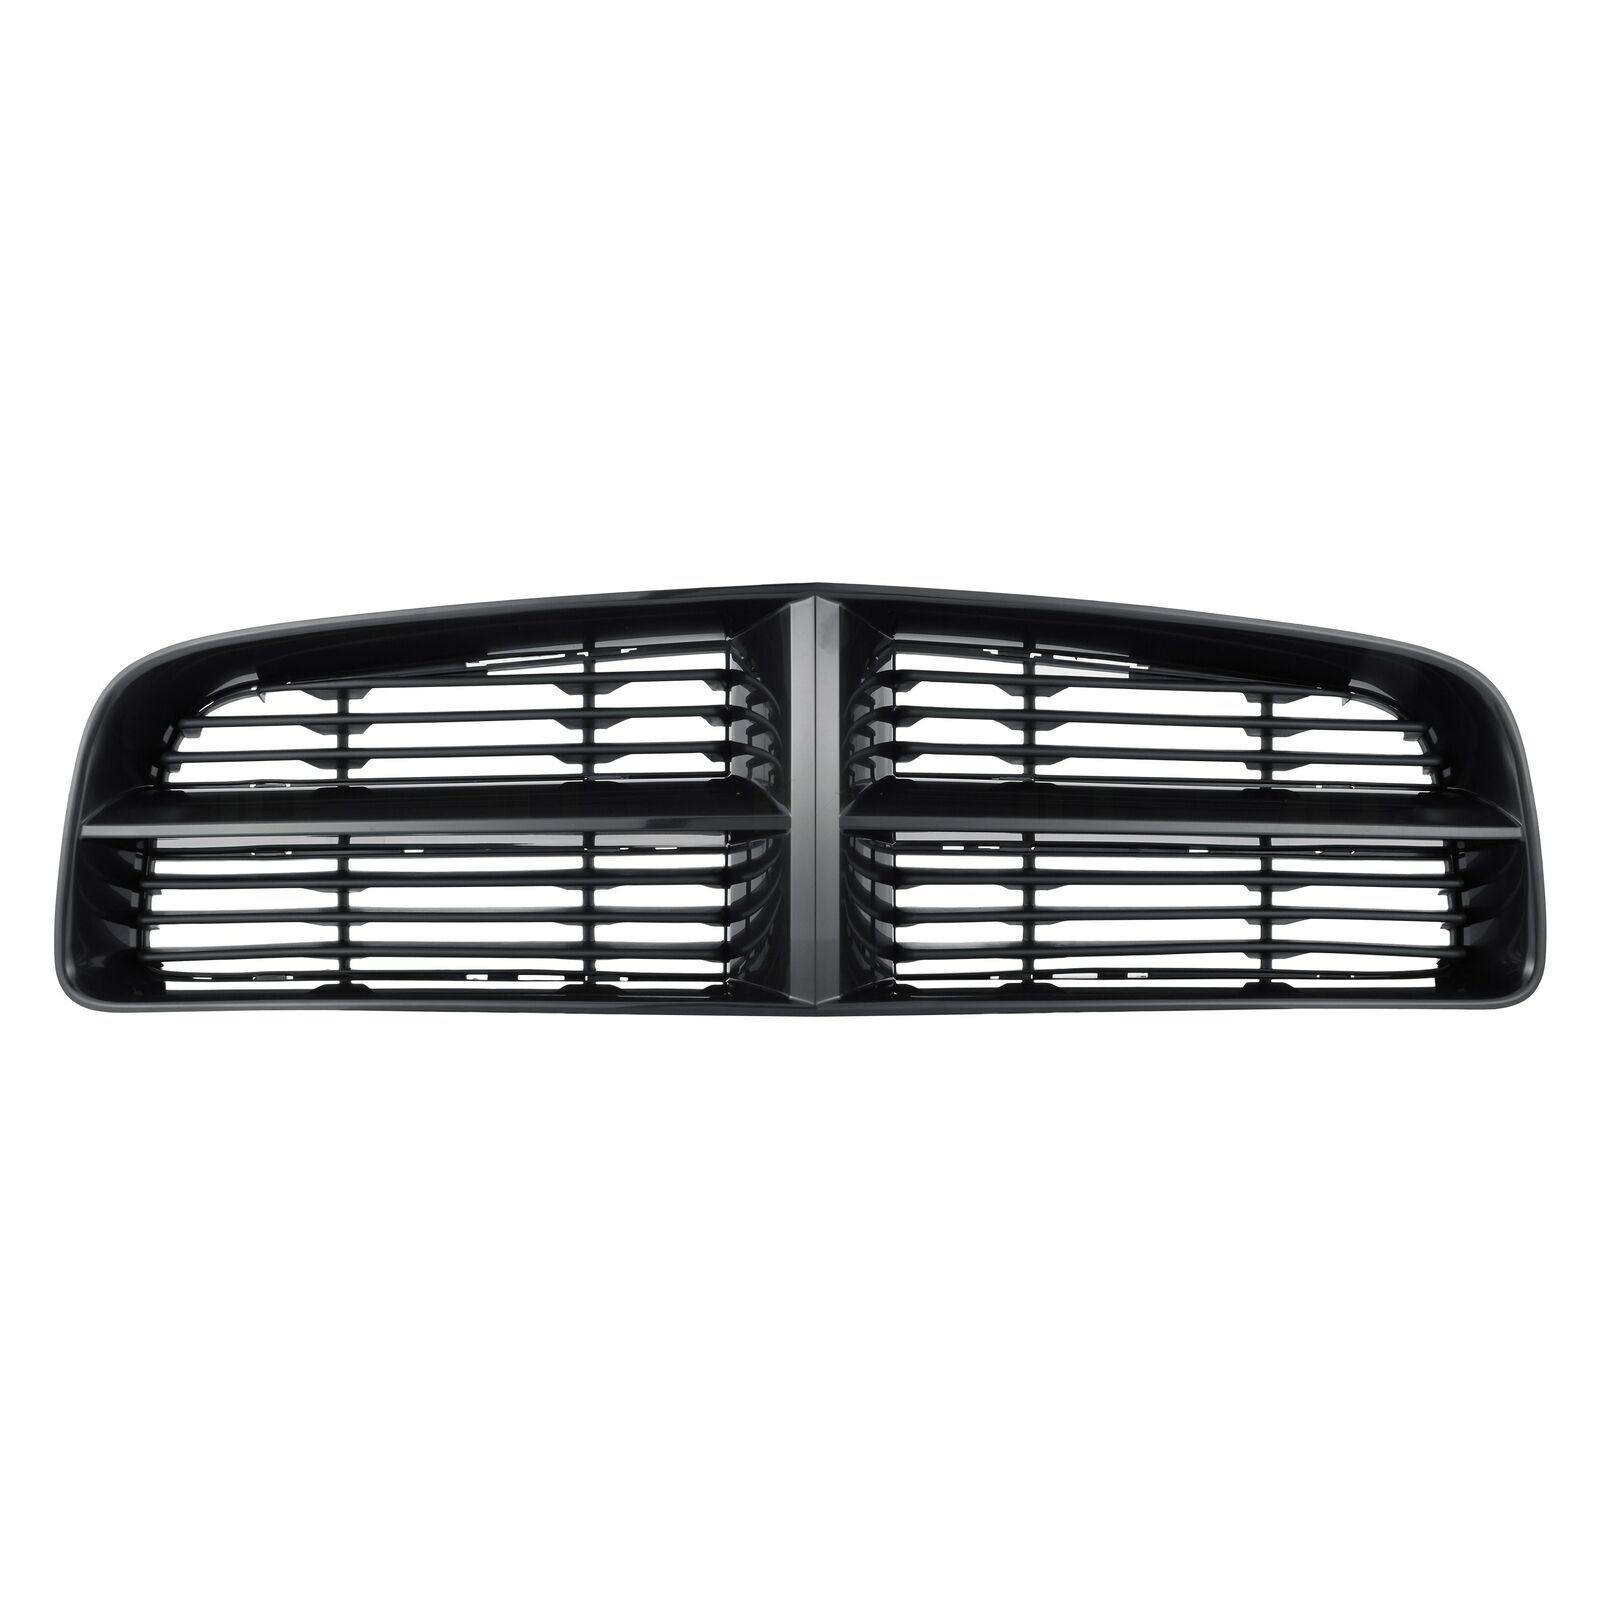 For Dodge Charger 2006-2010 Replace CH1200295 Grille